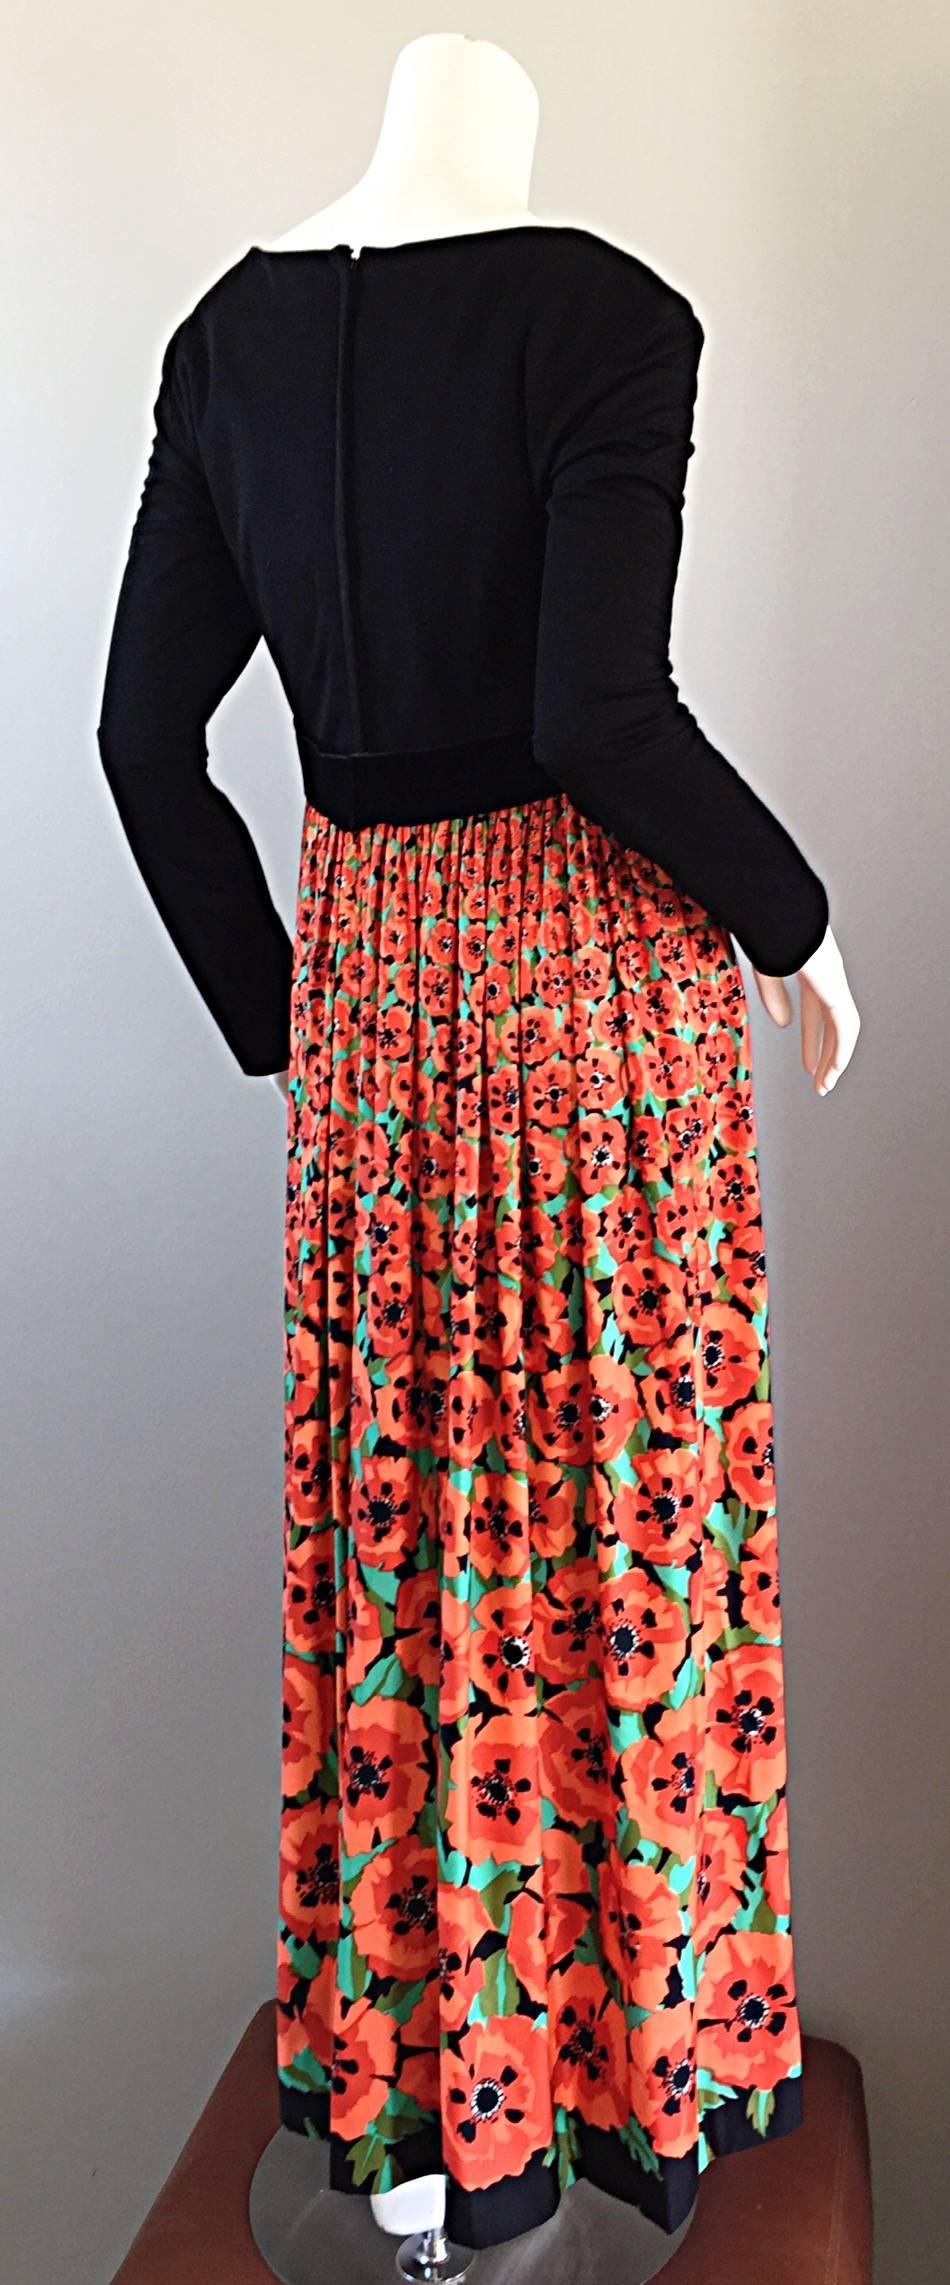 Beautiful vintage Joseph Magnin maxi dress! Jet black bodice, with 3-D 'hibiscus' printed maxi skirt. Hibiscus flowers start out small at waist, ending in oversized printed flowers at bottom. Chic long bow at waist, with hook-and-eye closure at back